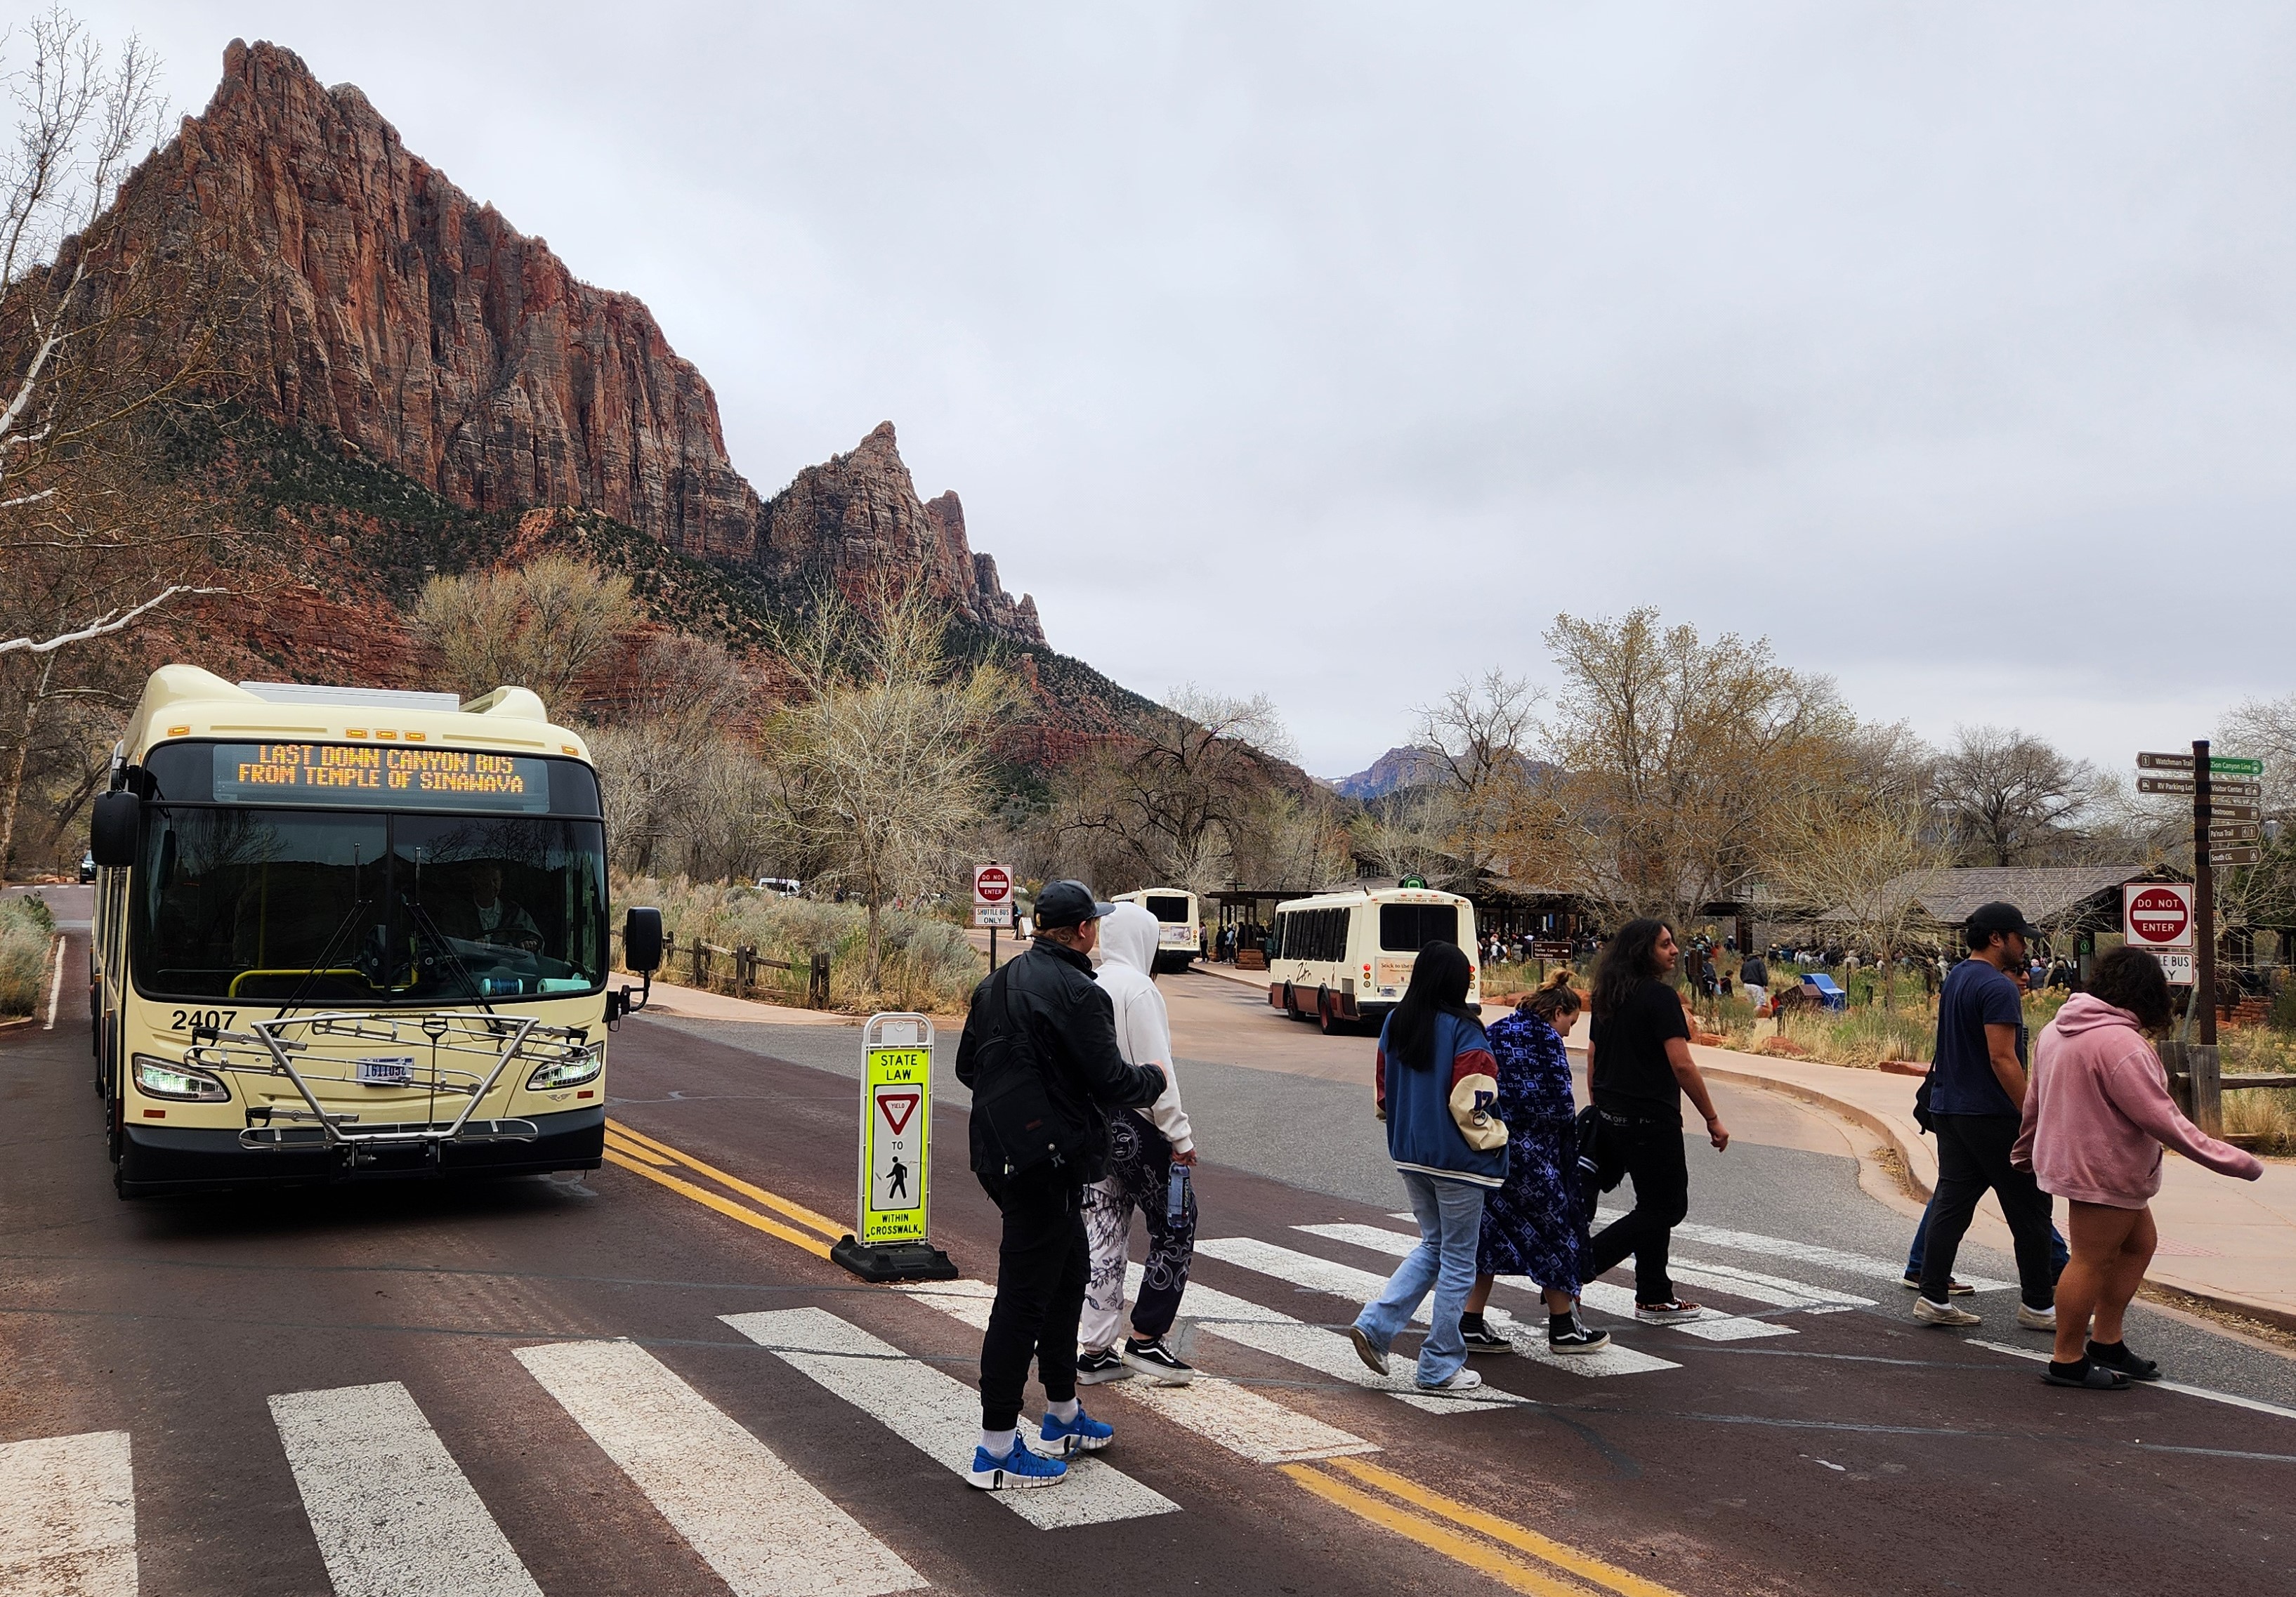 Zion shuttle bus stopped for pedestrians walking in crosswalk near shuttle boarding area. Red rock towers in the background along with shuttles waiting for visitors to board in a nearby paved area.